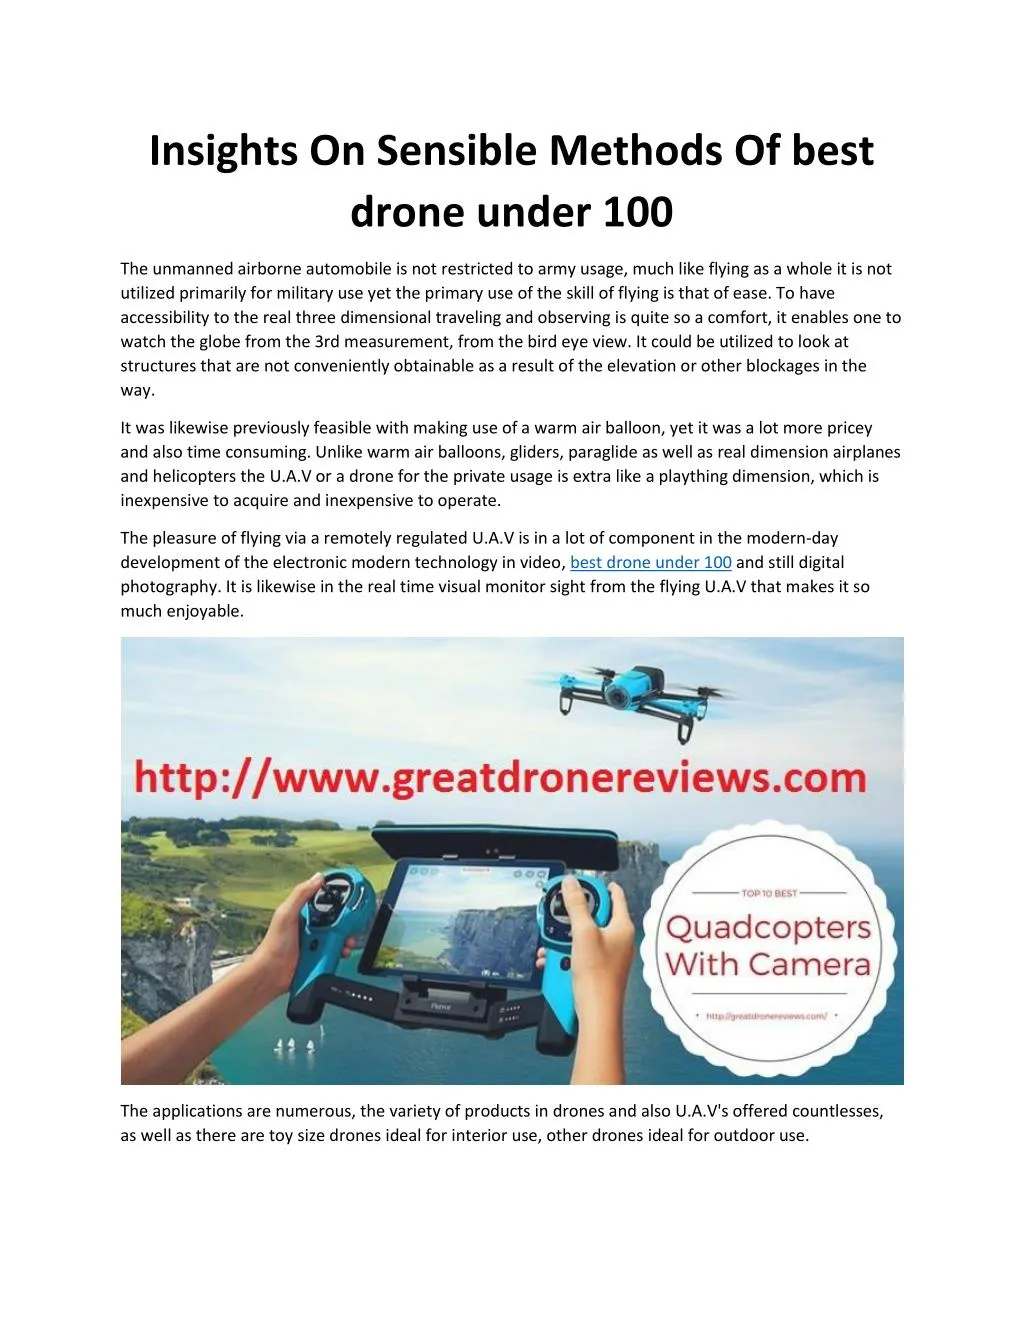 insights on sensible methods of best drone under